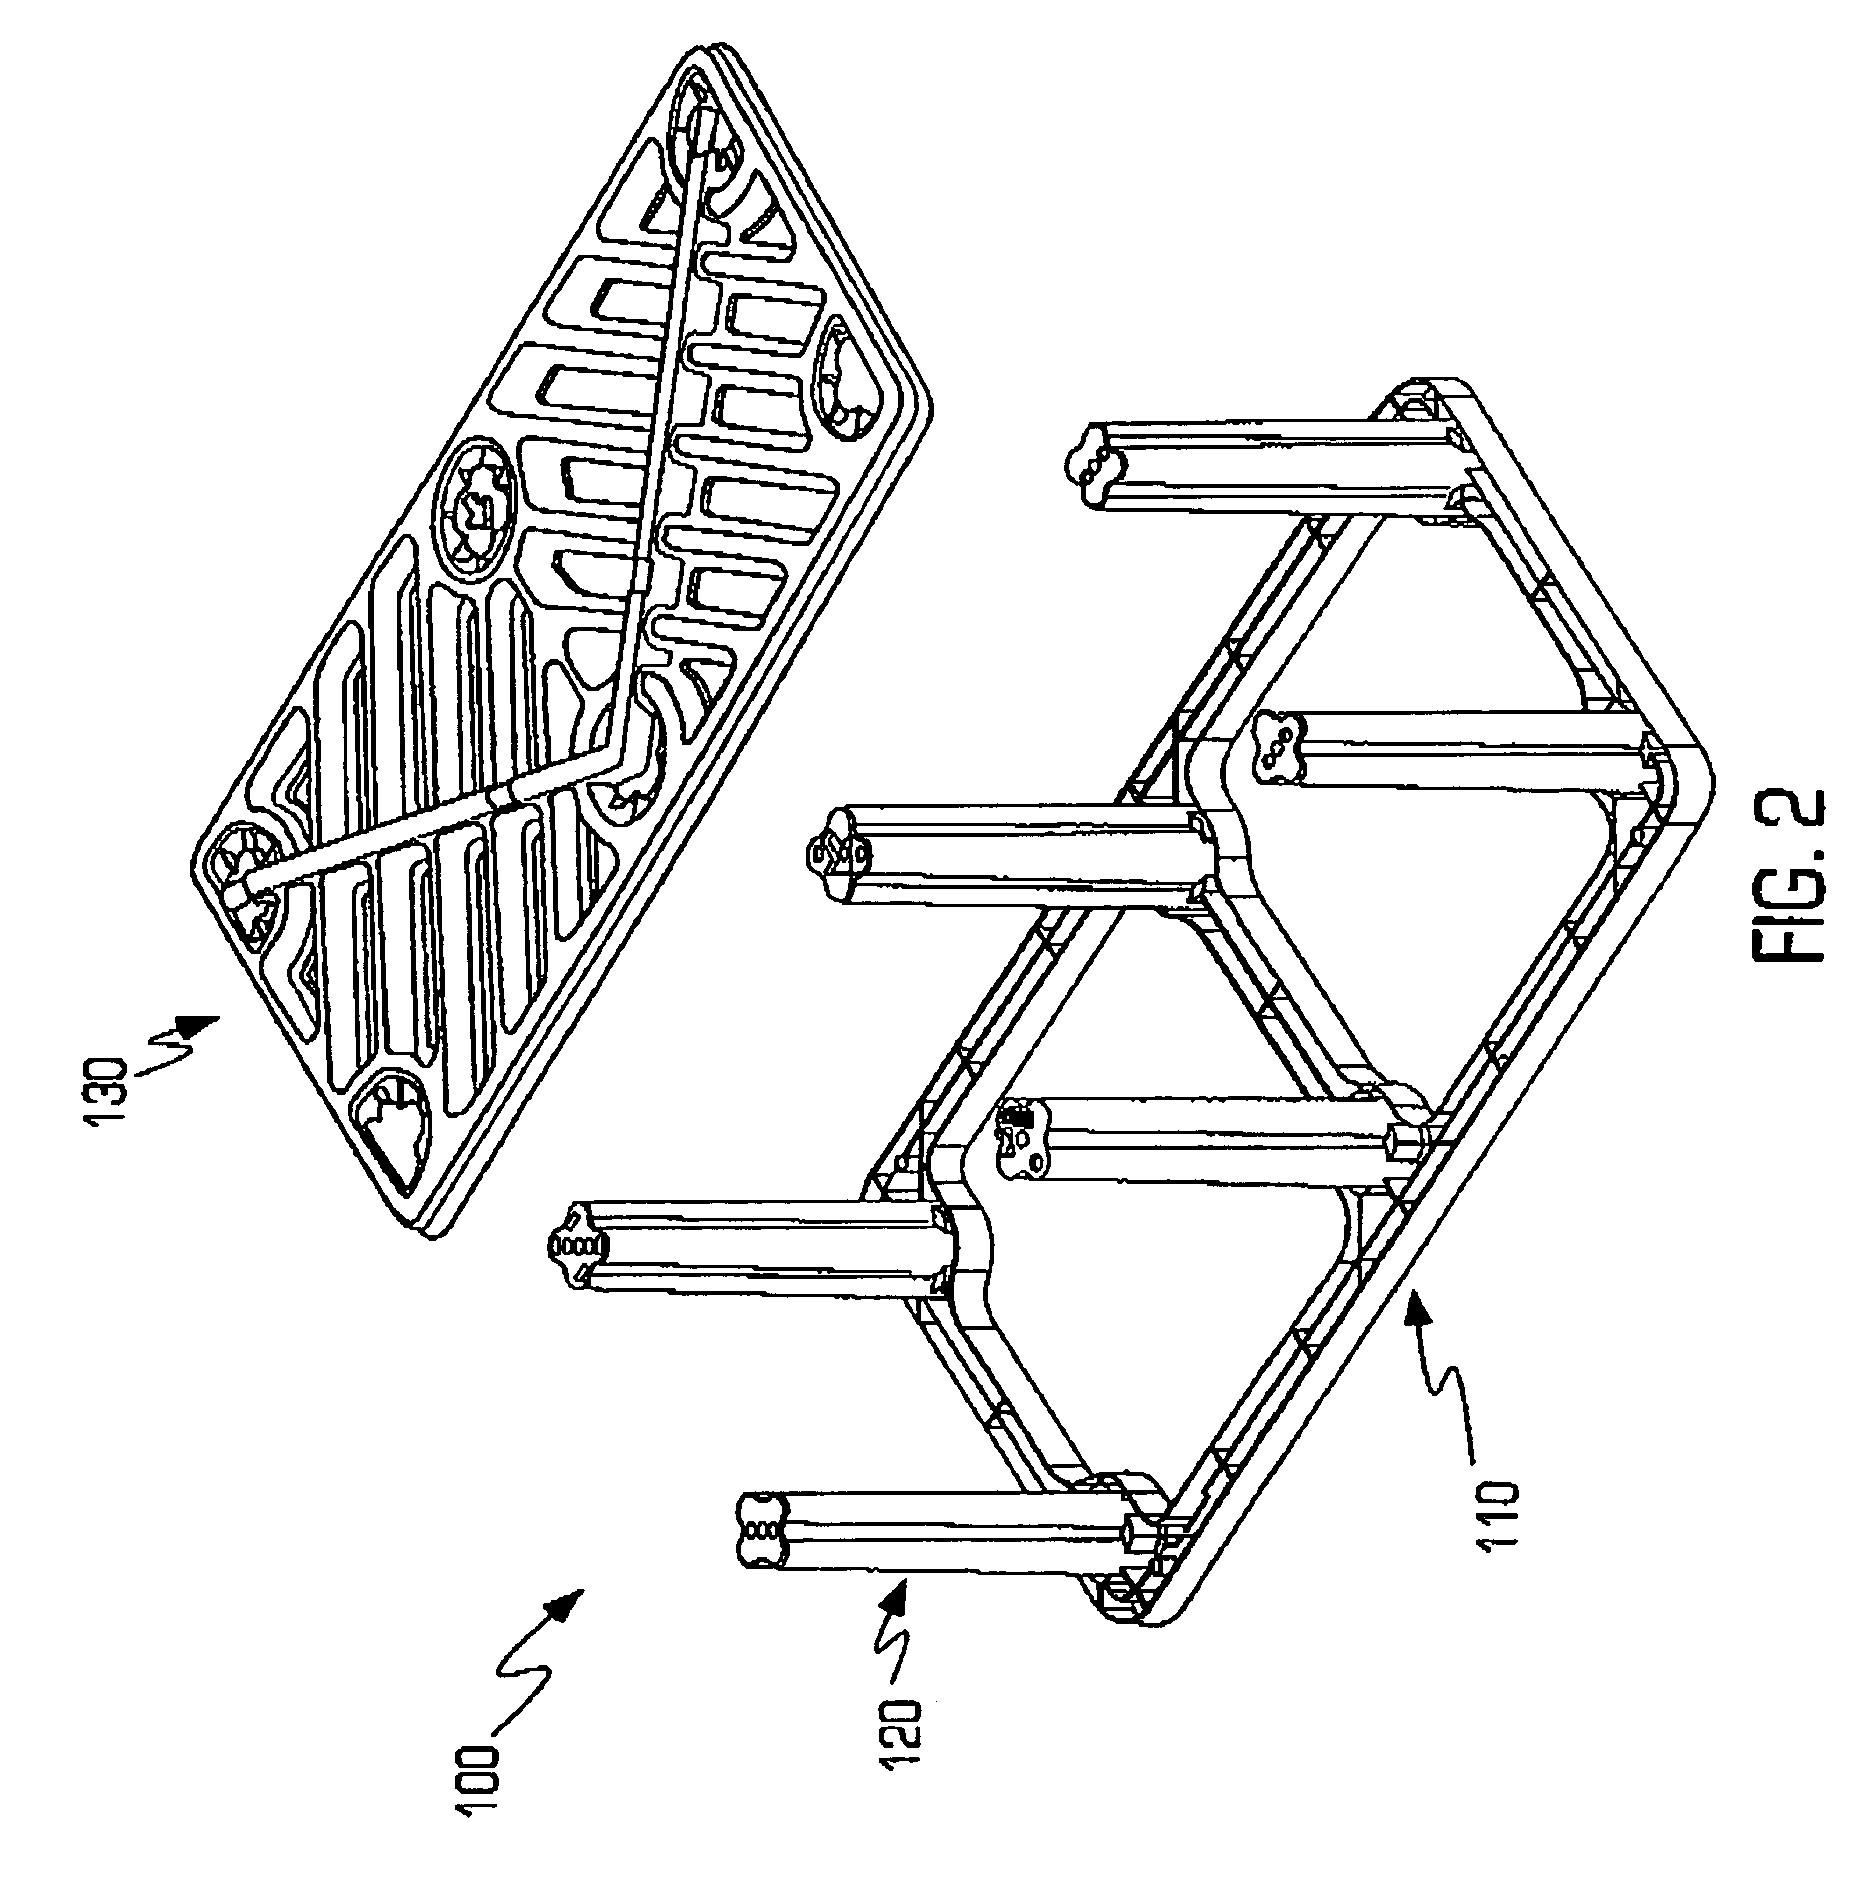 Stackable structural cell having improved support characteristics